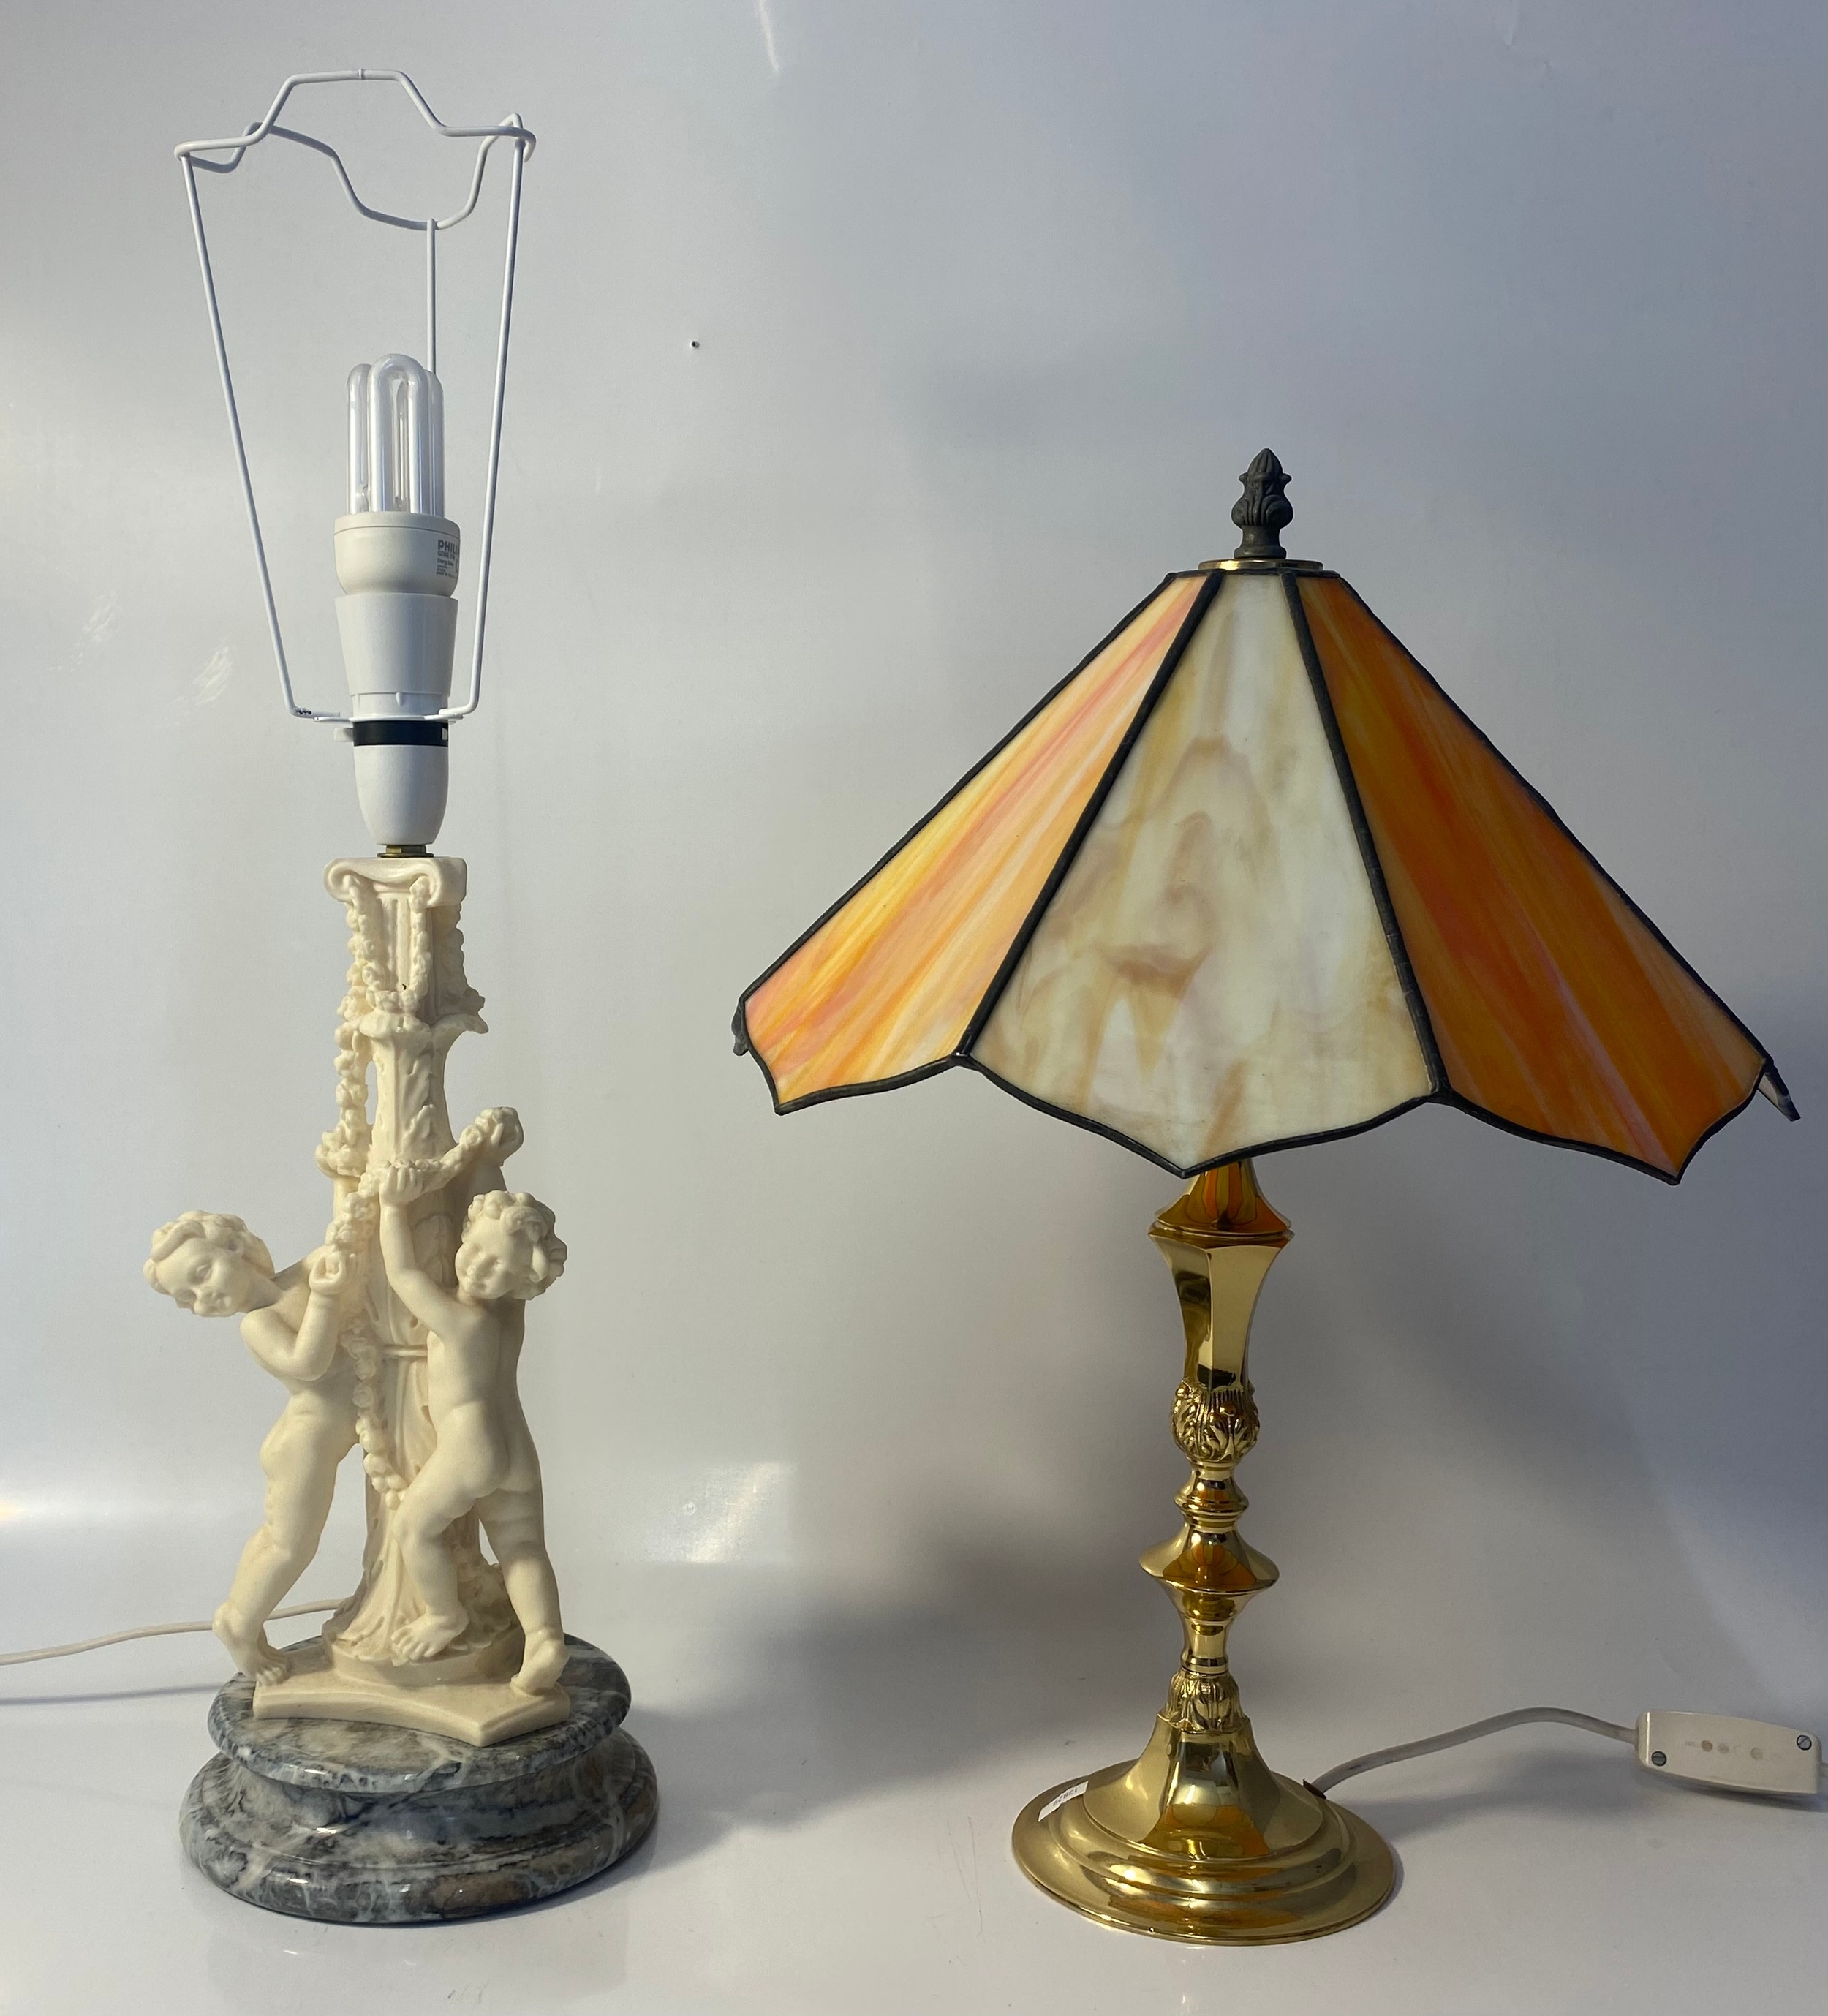 Figural cherub table lamp on marble Plinth together with brass table lamp